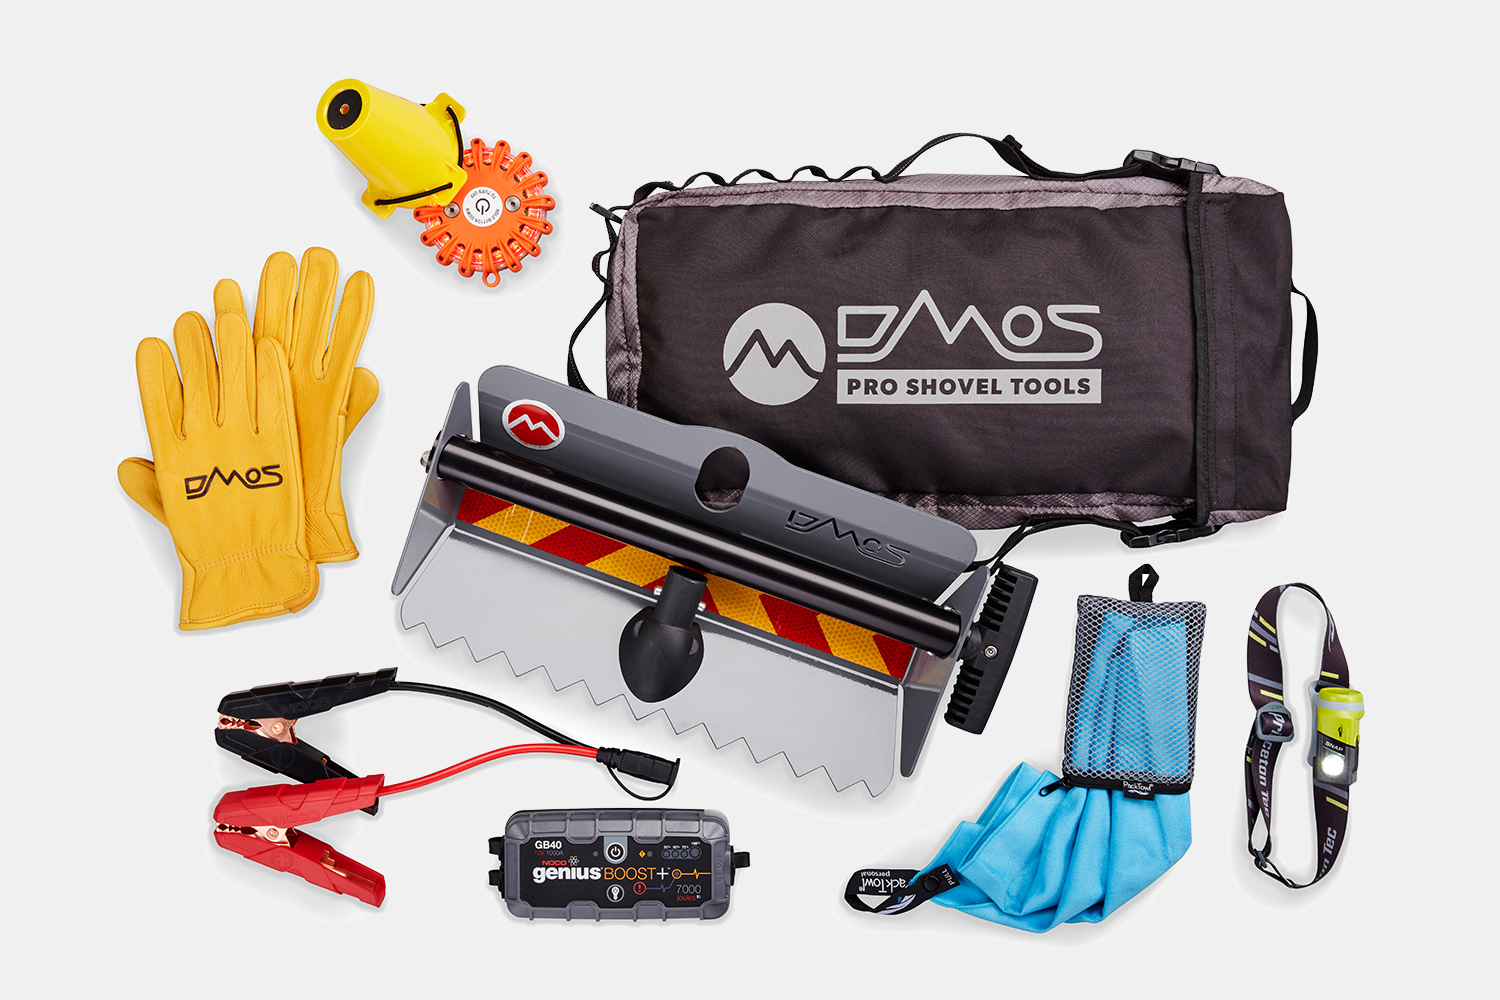 DMOS Roadside Expansion Kit and Collapsible Shovel